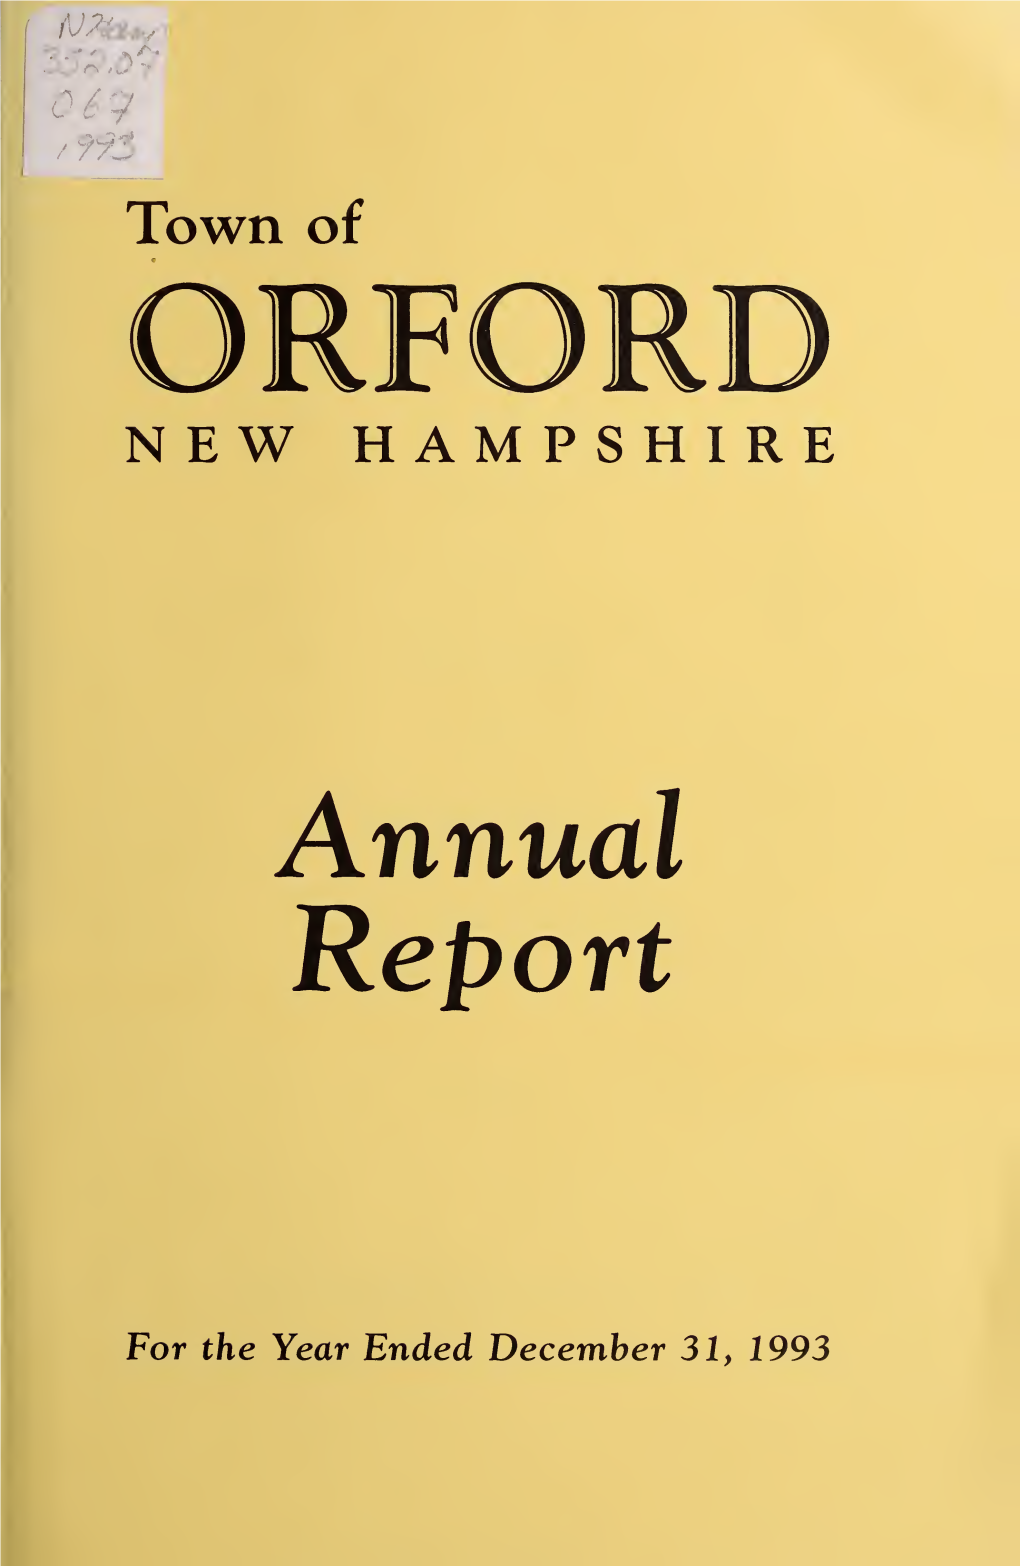 Annual Report of the Town of Orford, New Hampshire